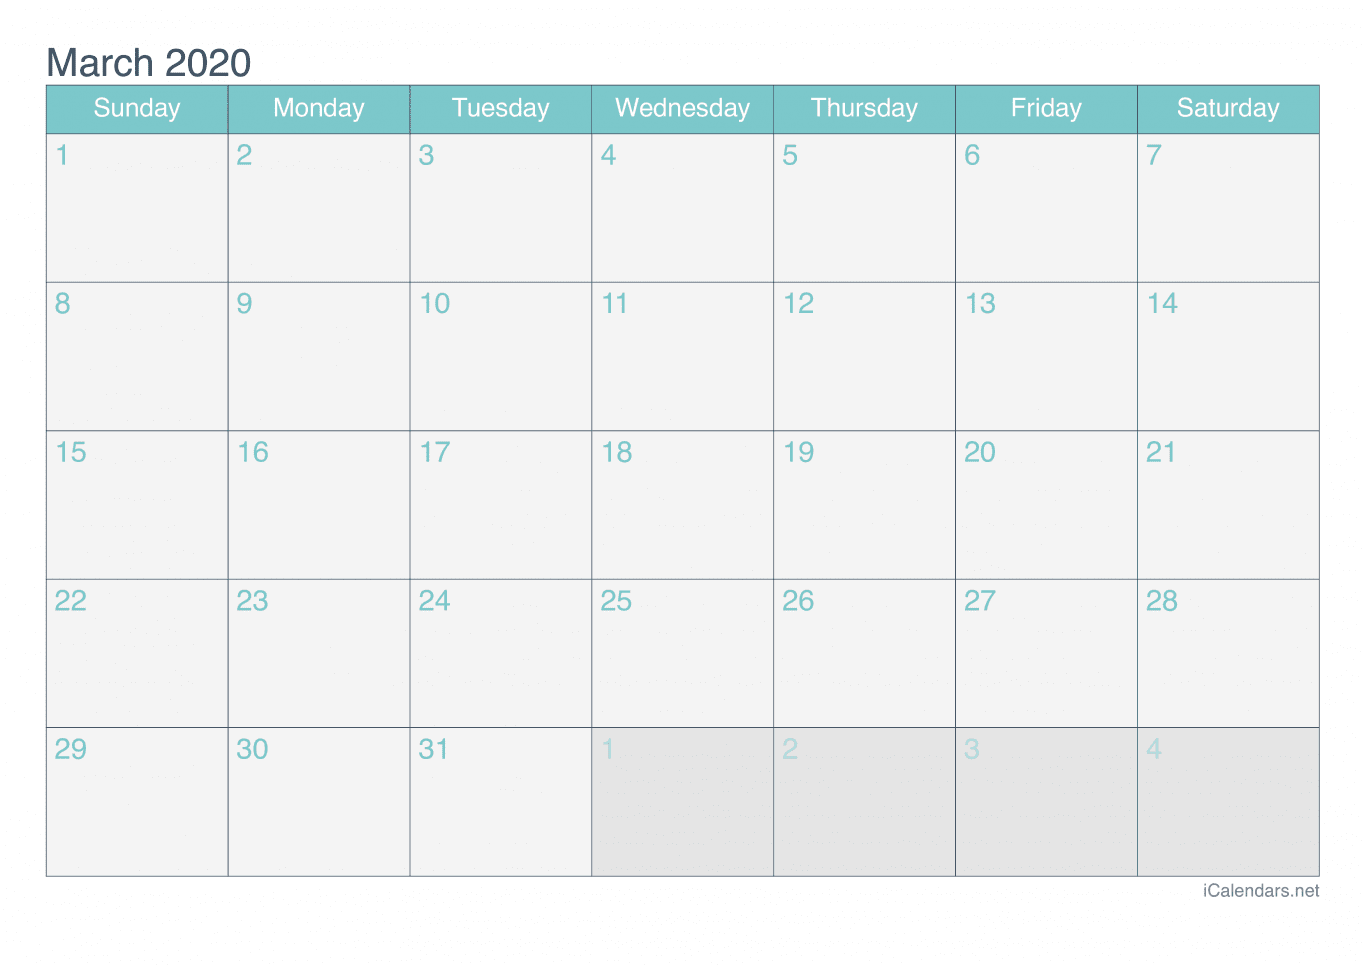 2020 March Calendar - Turquoise